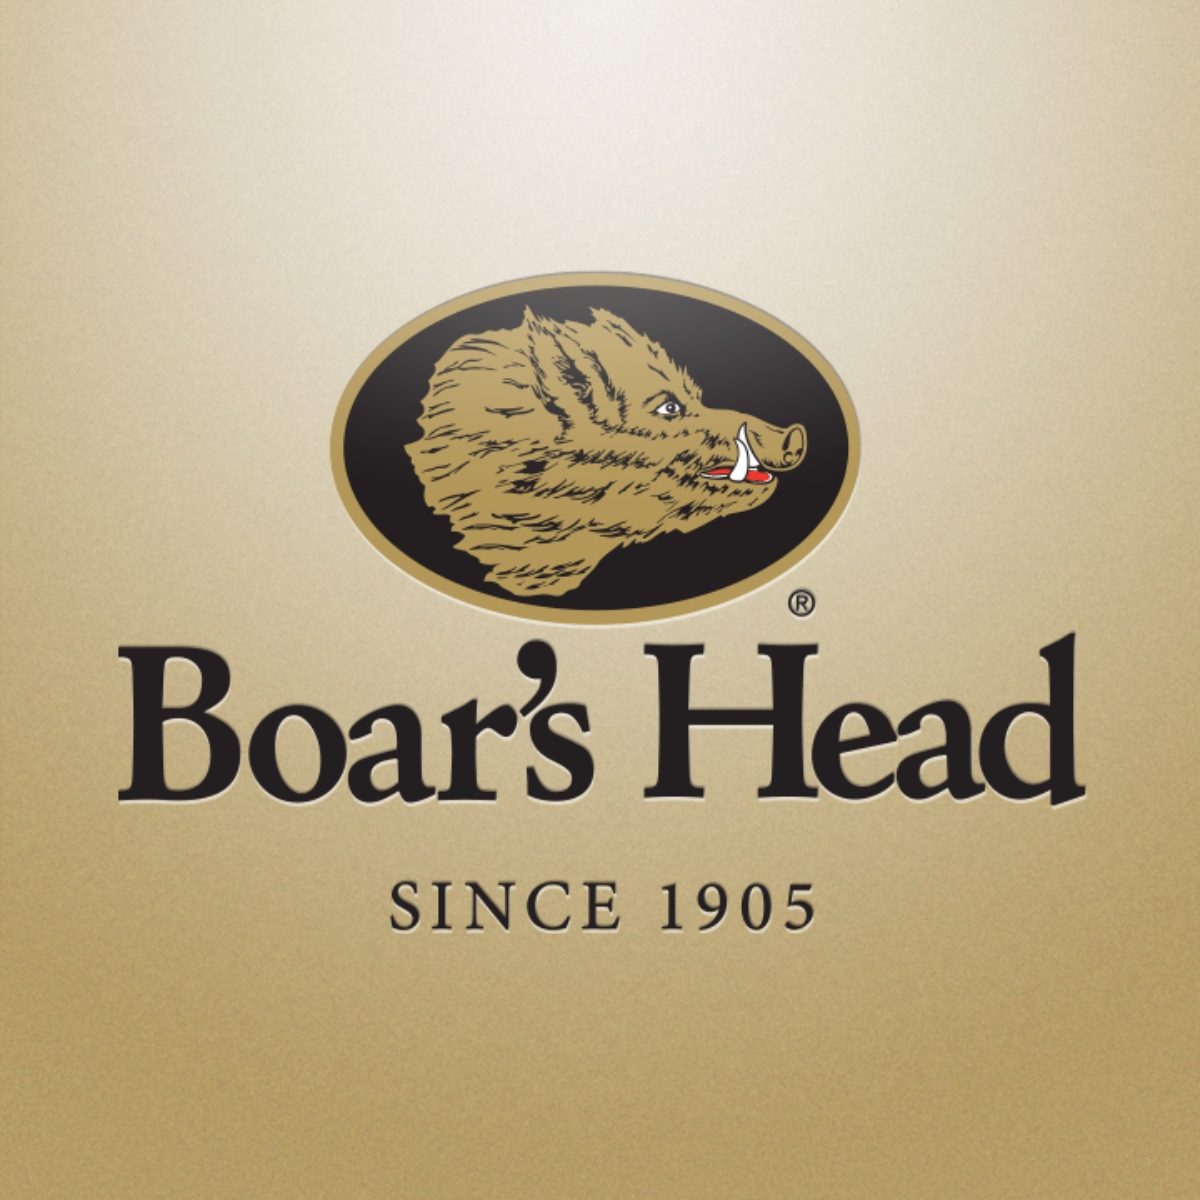 <p><strong><a class="SWhtmlLink" href="https://boarshead.com" rel="noopener">Boar's Head</a>, New York City</strong></p> <p>Back in 1905, the Boar's Head founder was delivering his deli meat with a horse-drawn wagon. Today, it's still a family-run company but it's distributed all over the country! In addition to high-quality deli meats, you can also find their signature condiments, like mustard and barbecue sauce.</p>